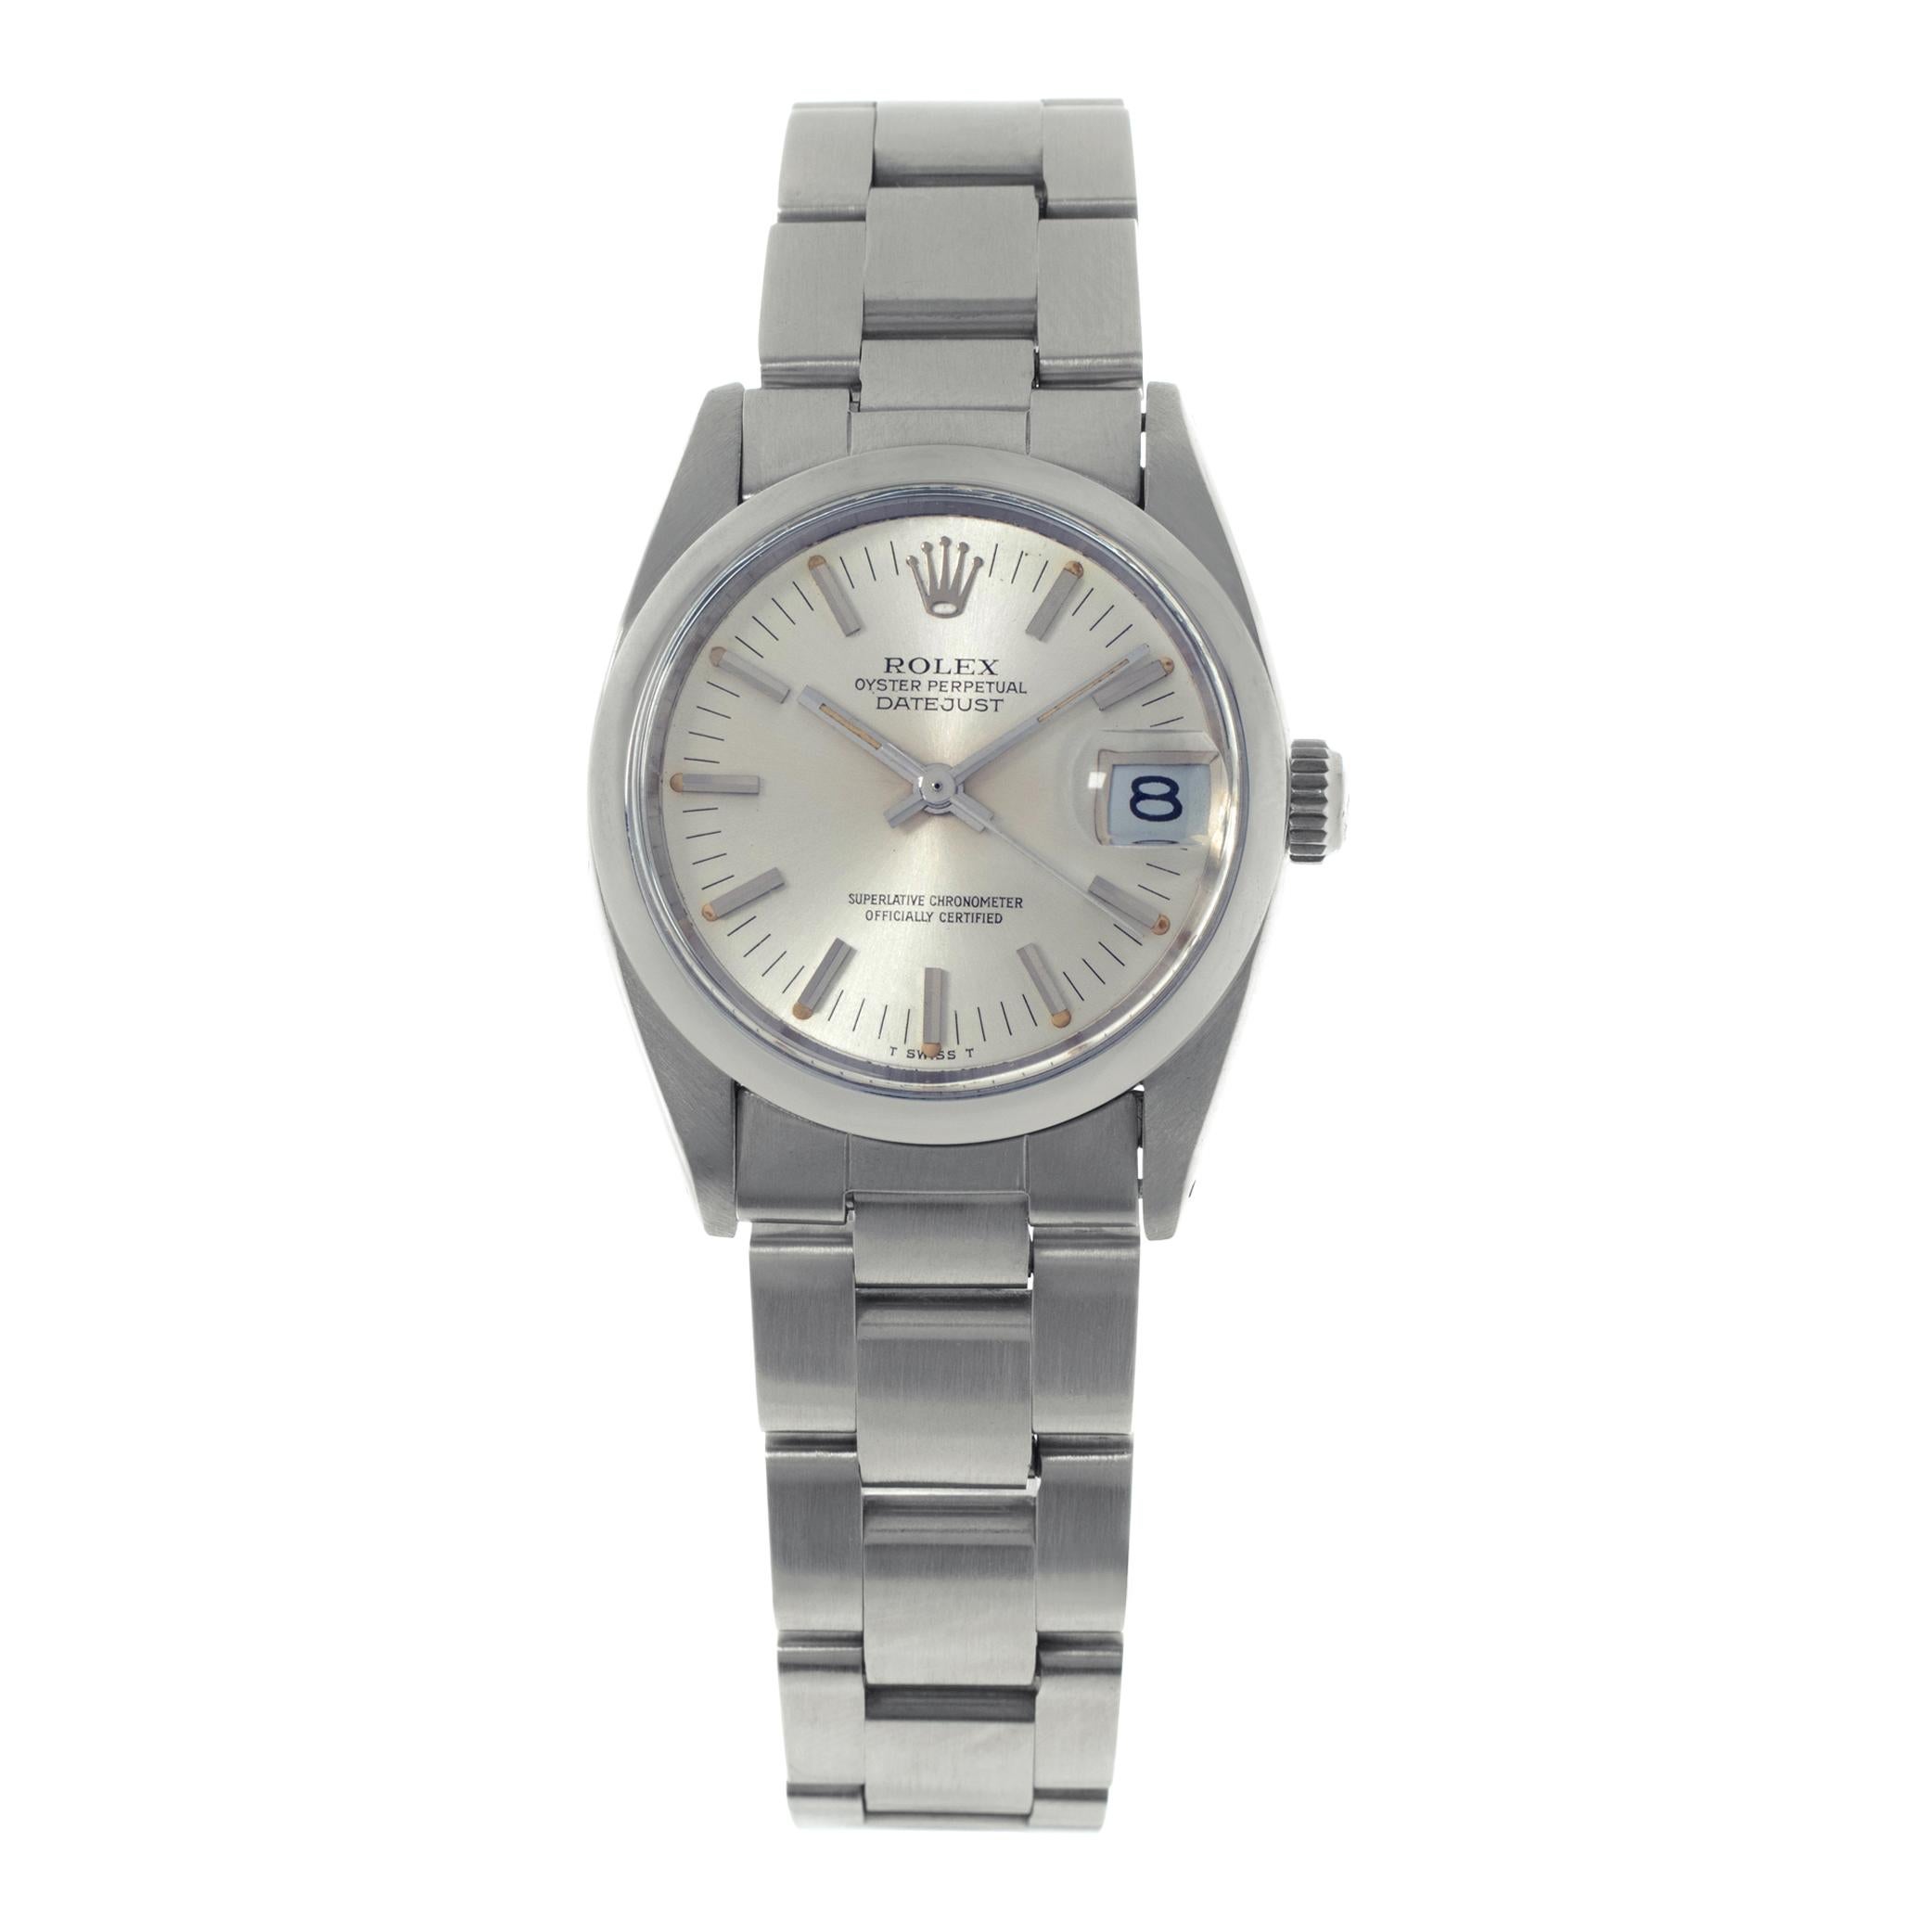 Rolex Datejust stainless steel Automatic Wristwatch Ref 68240 For Sale